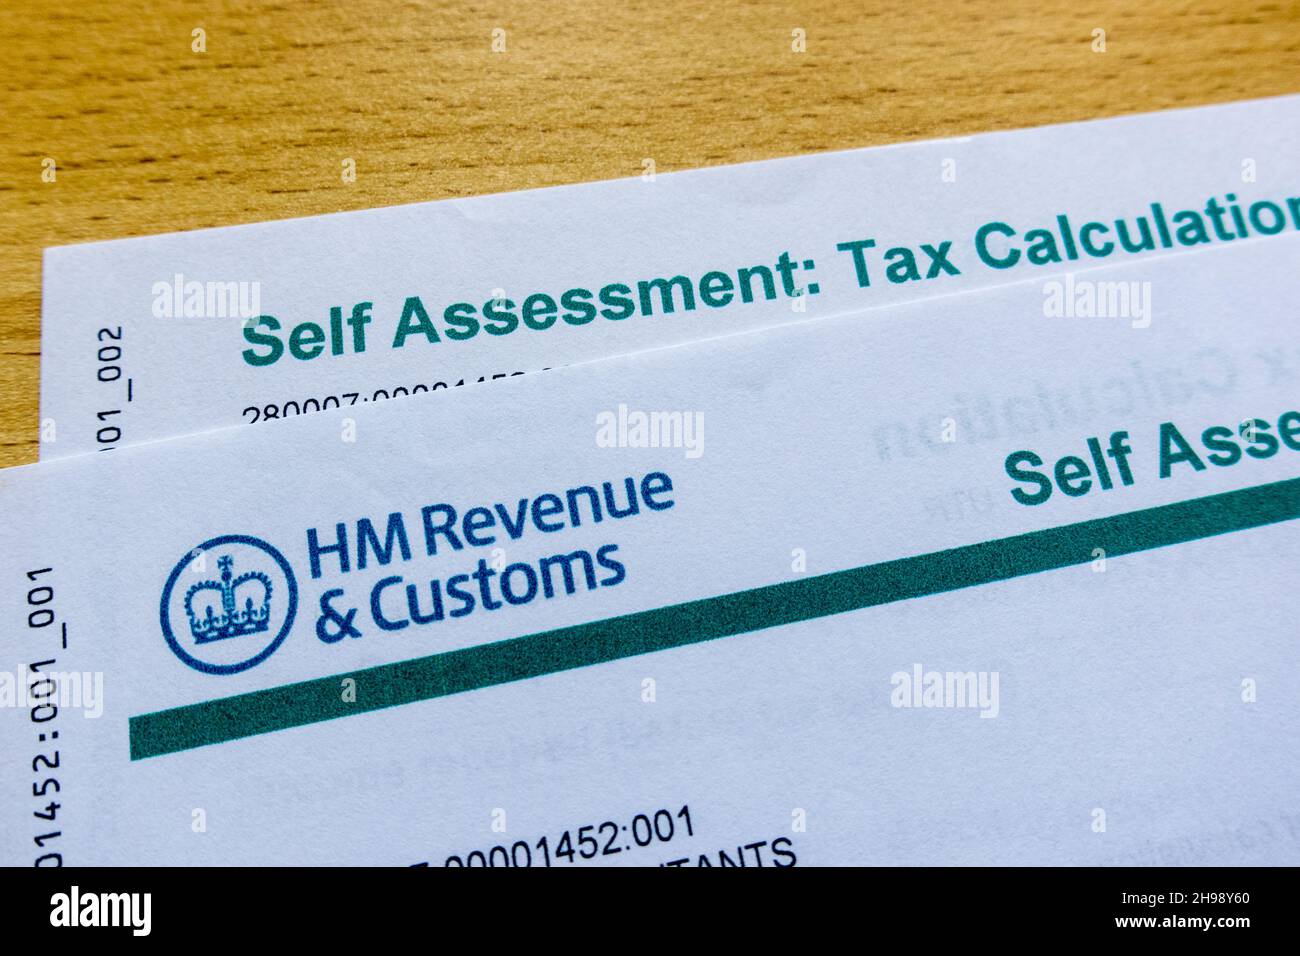 HMRC Letter for Self Assessment printed on color paper on a table Stock Photo